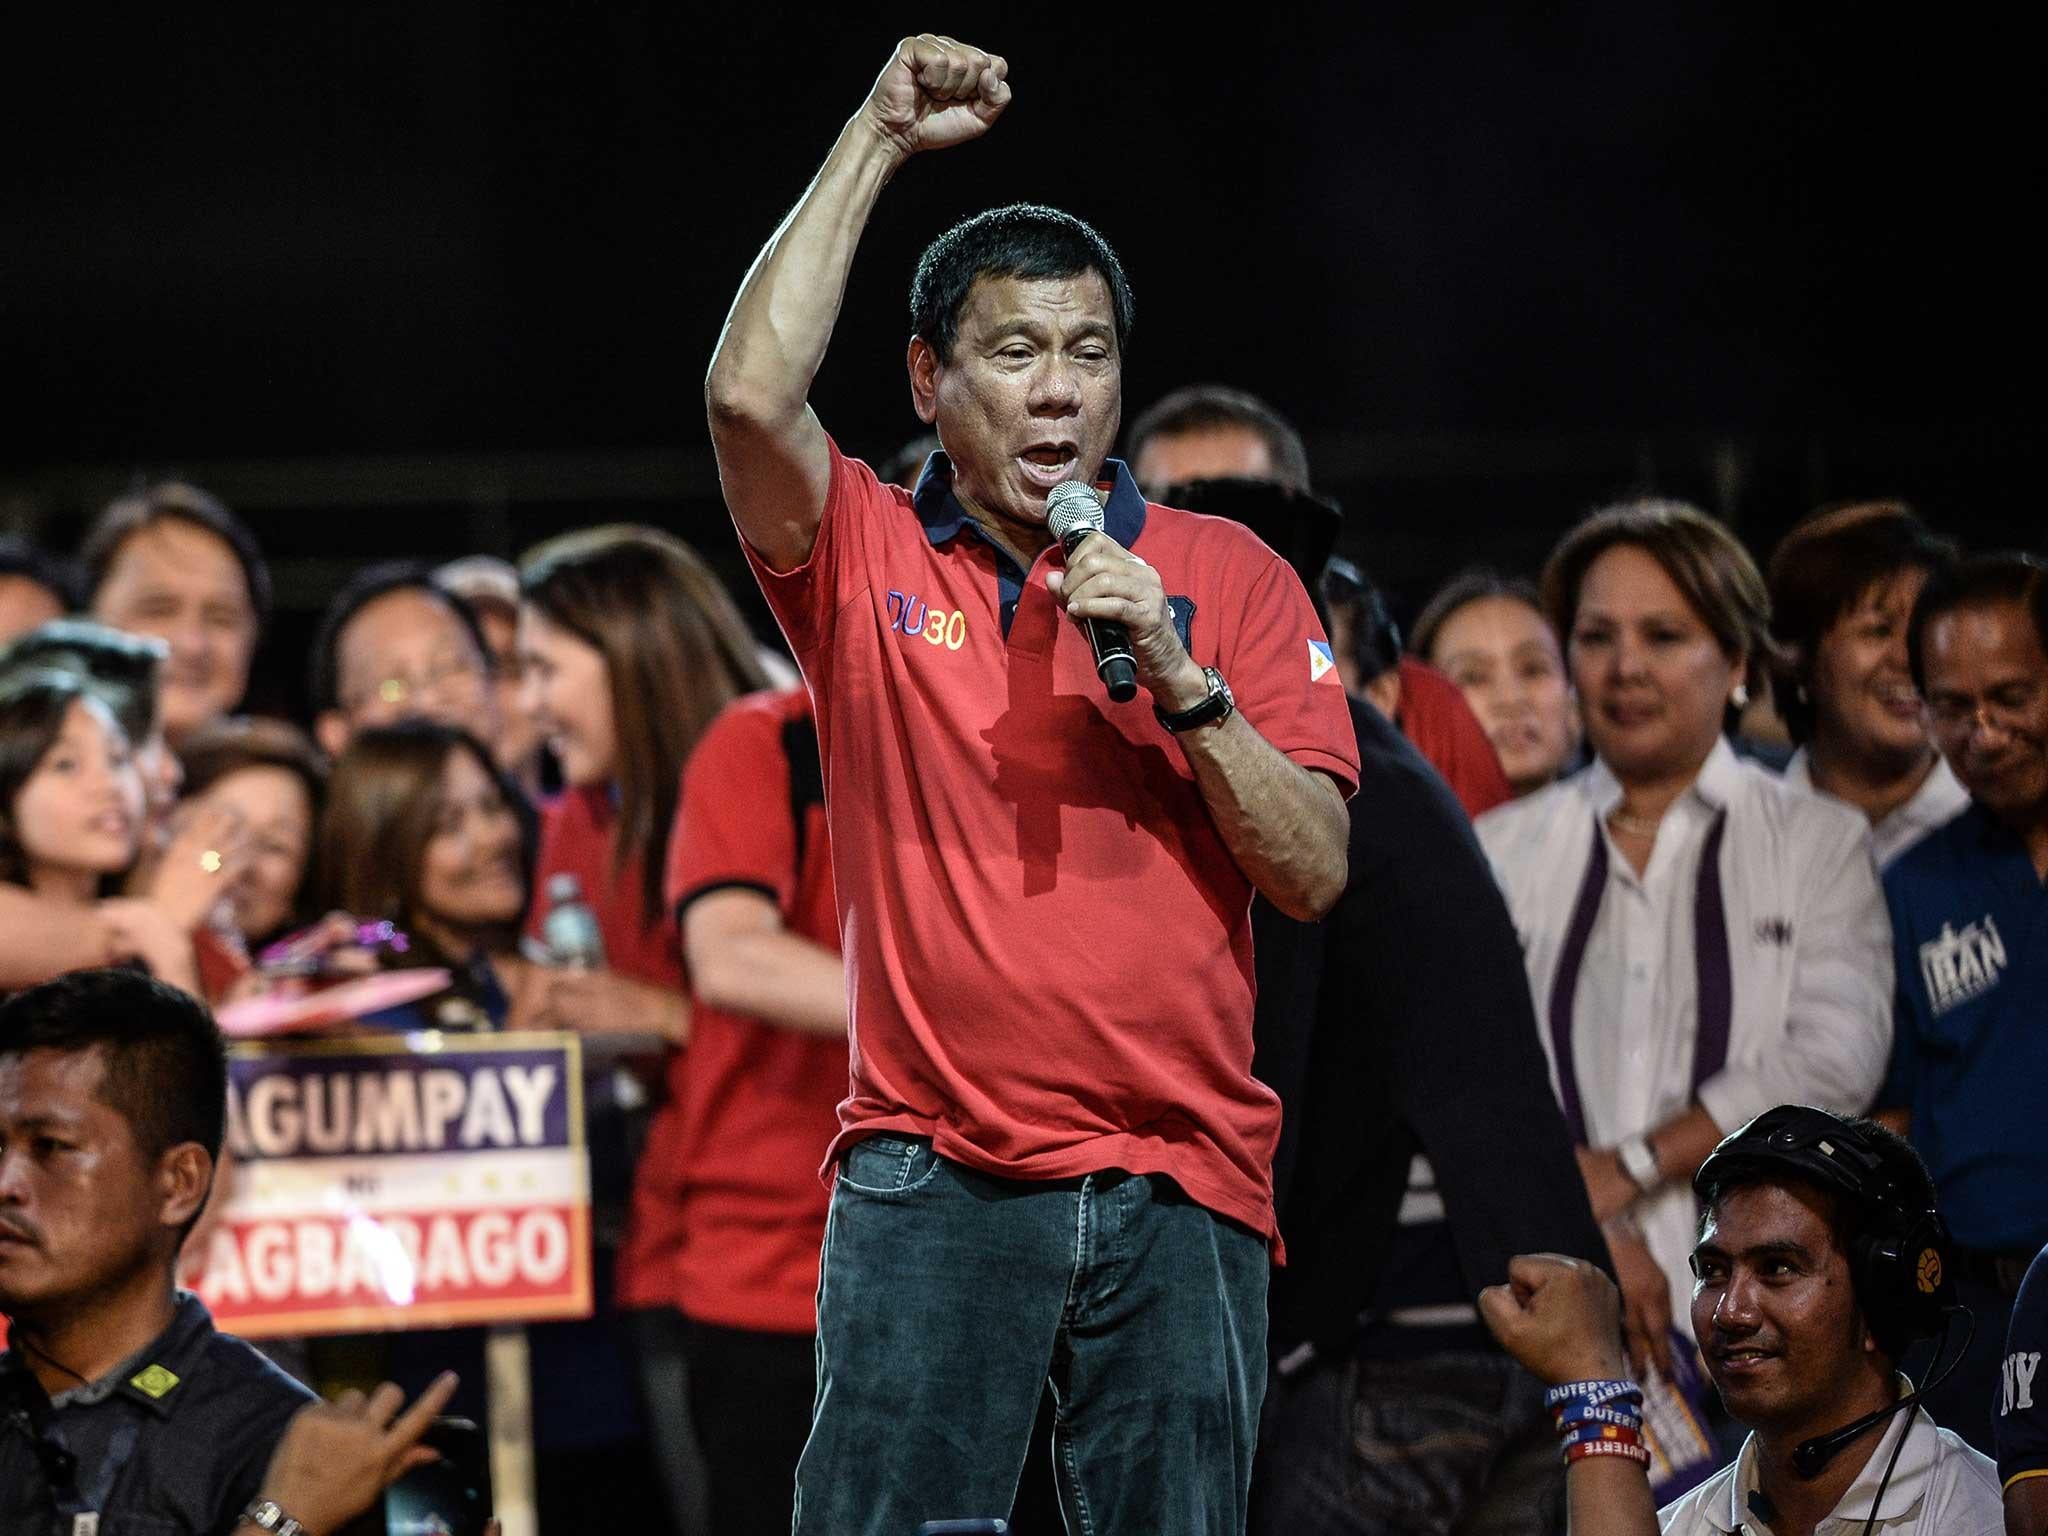 Mass-murder advocate Duterte at an election rally: he has promised medals to any member of the public who shoots a drug dealer